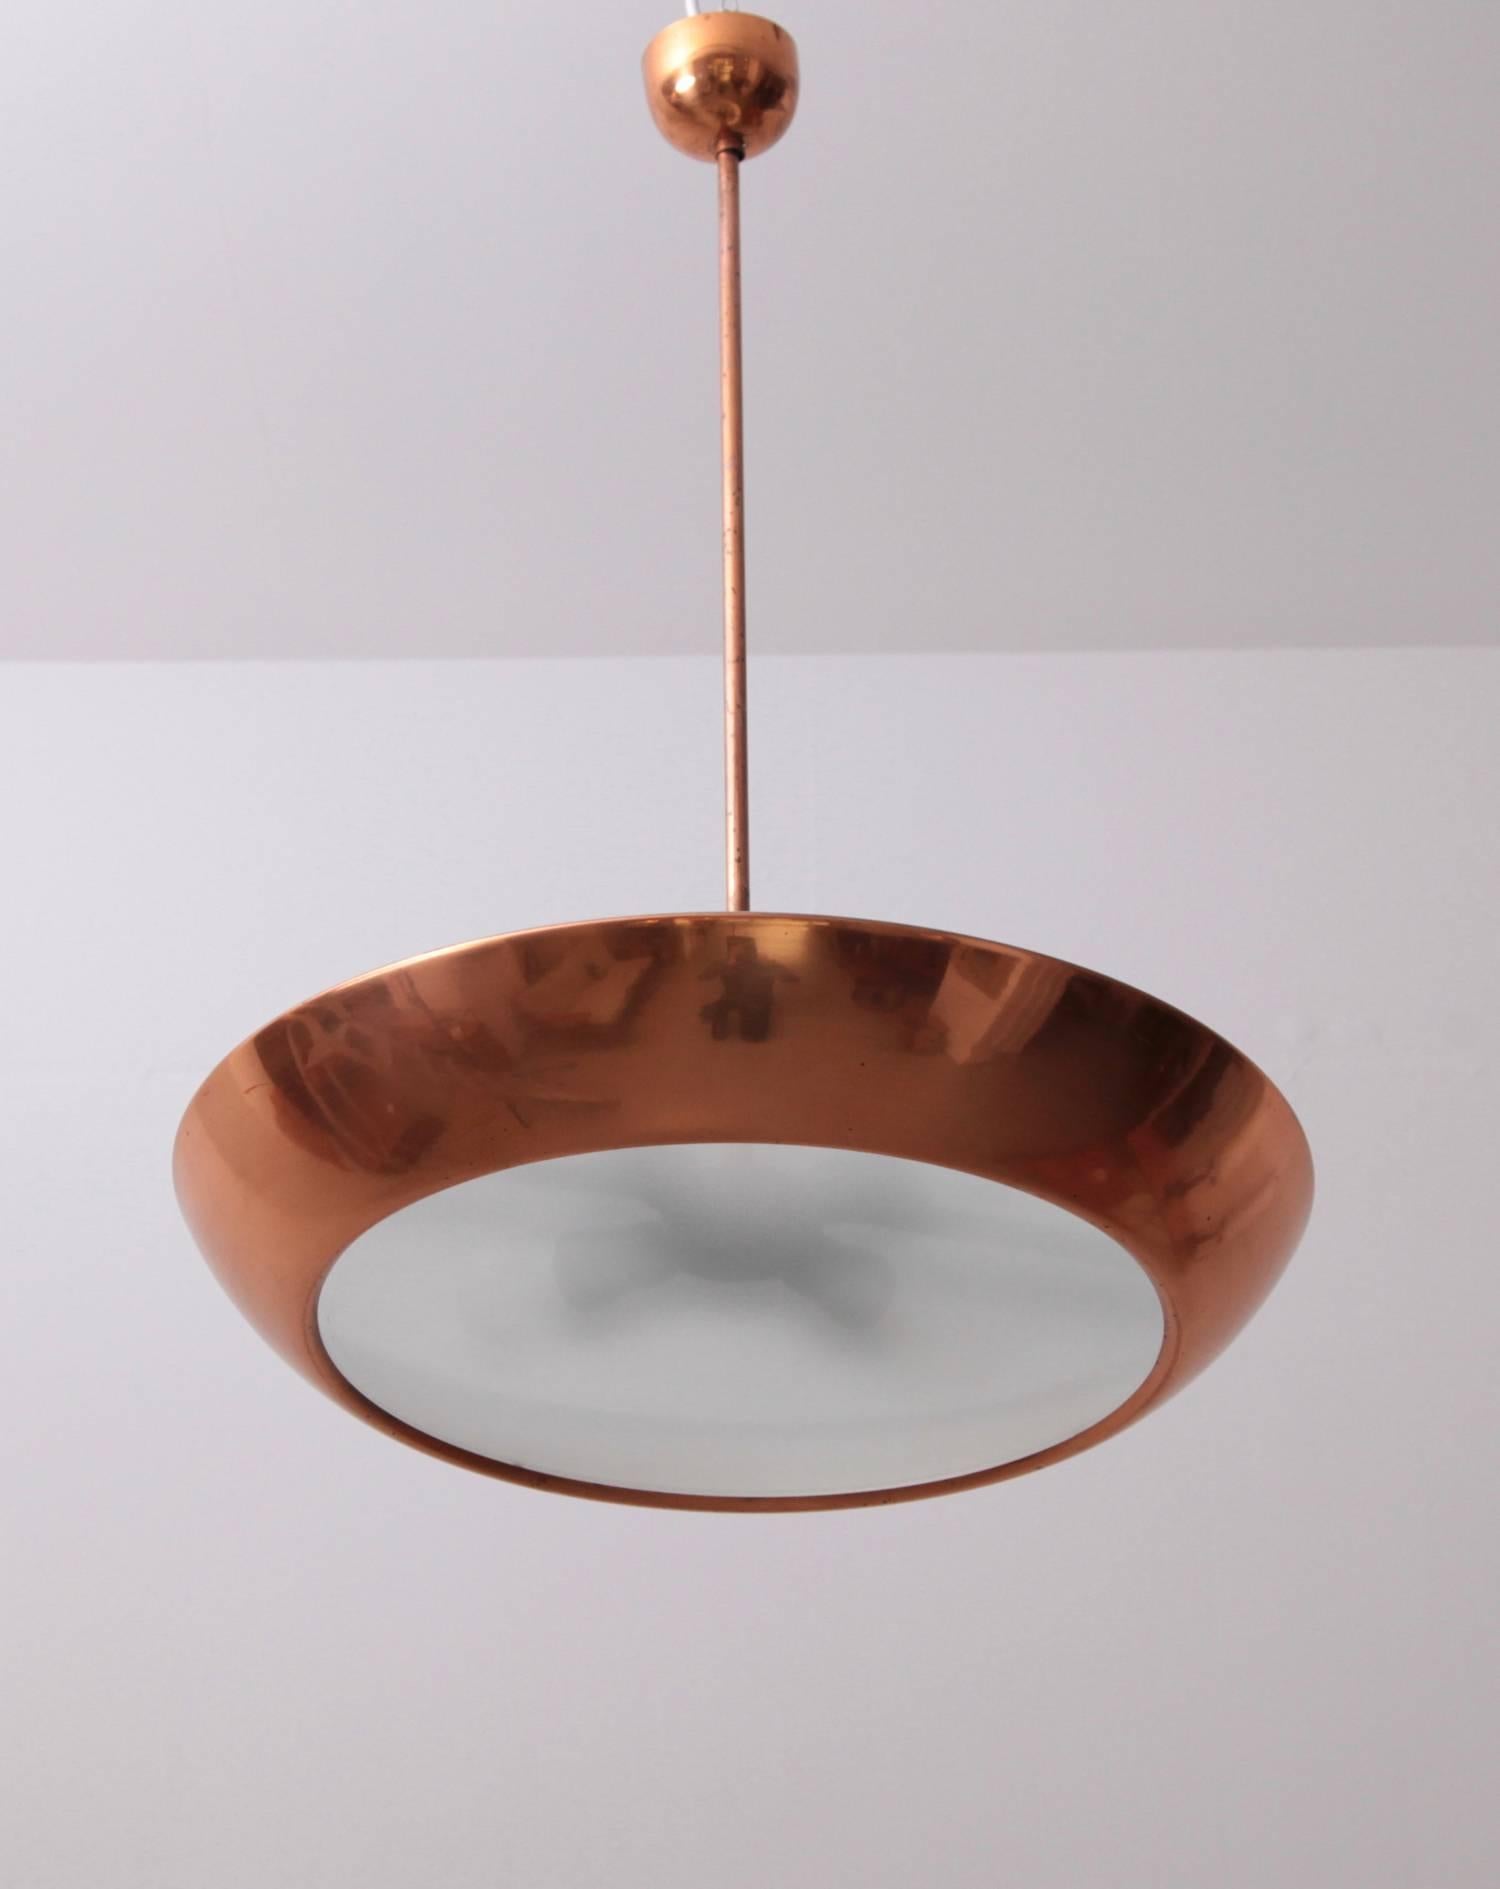 Available one of two Hurka pendant Lamps in copper in very good condition. 4xE27 each and newly wired.
To be on the safe side, the lamp should be checked locally by a specialist concerning local requirements.

